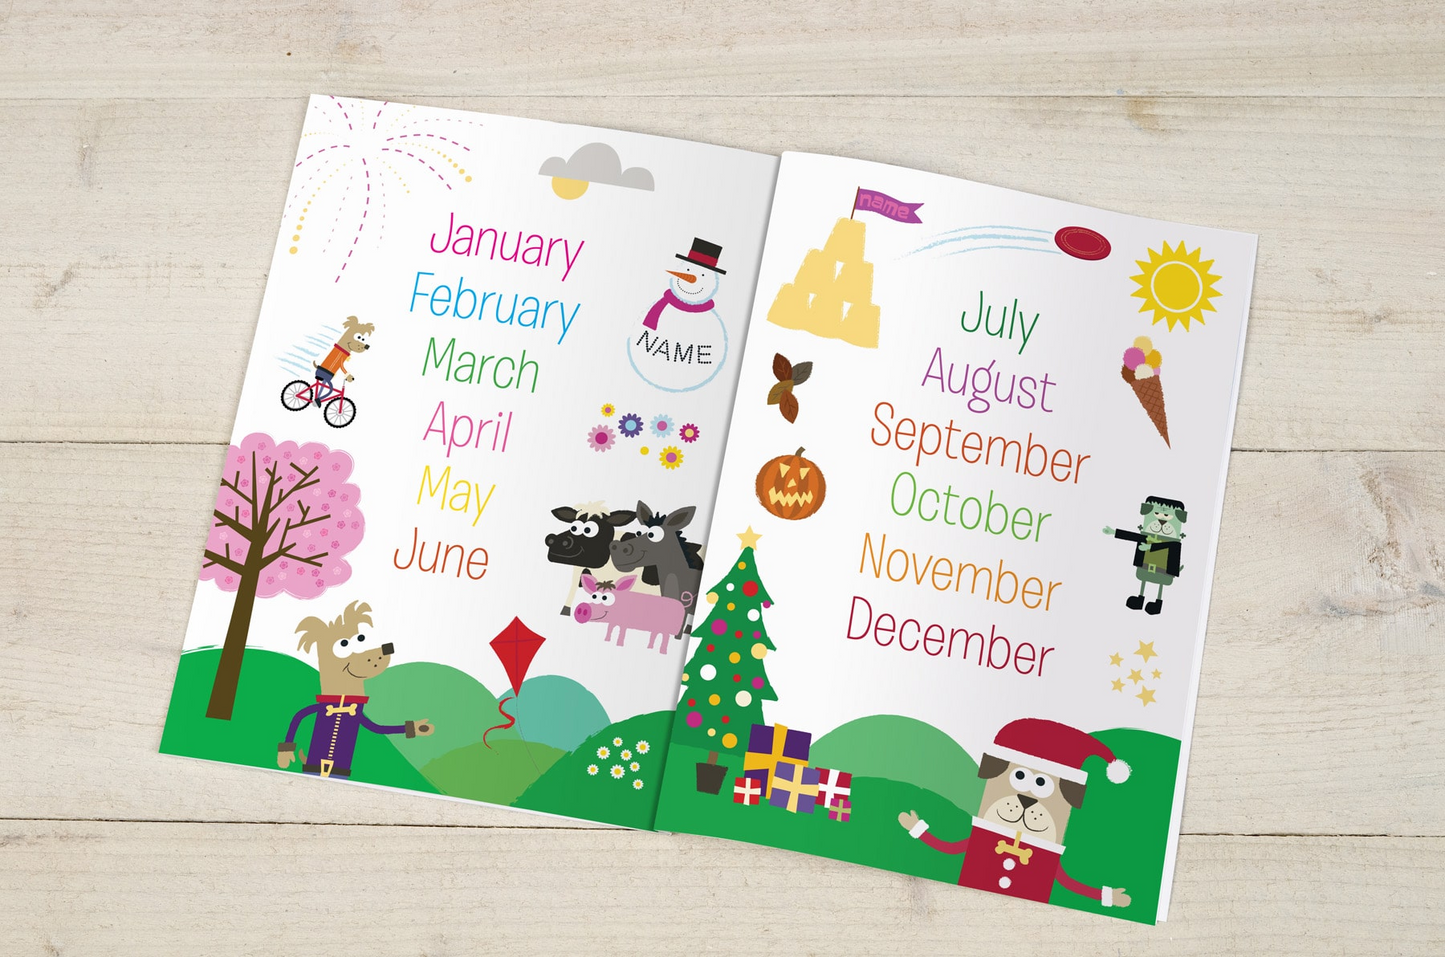 Personalised Months of the Year Children’s Book